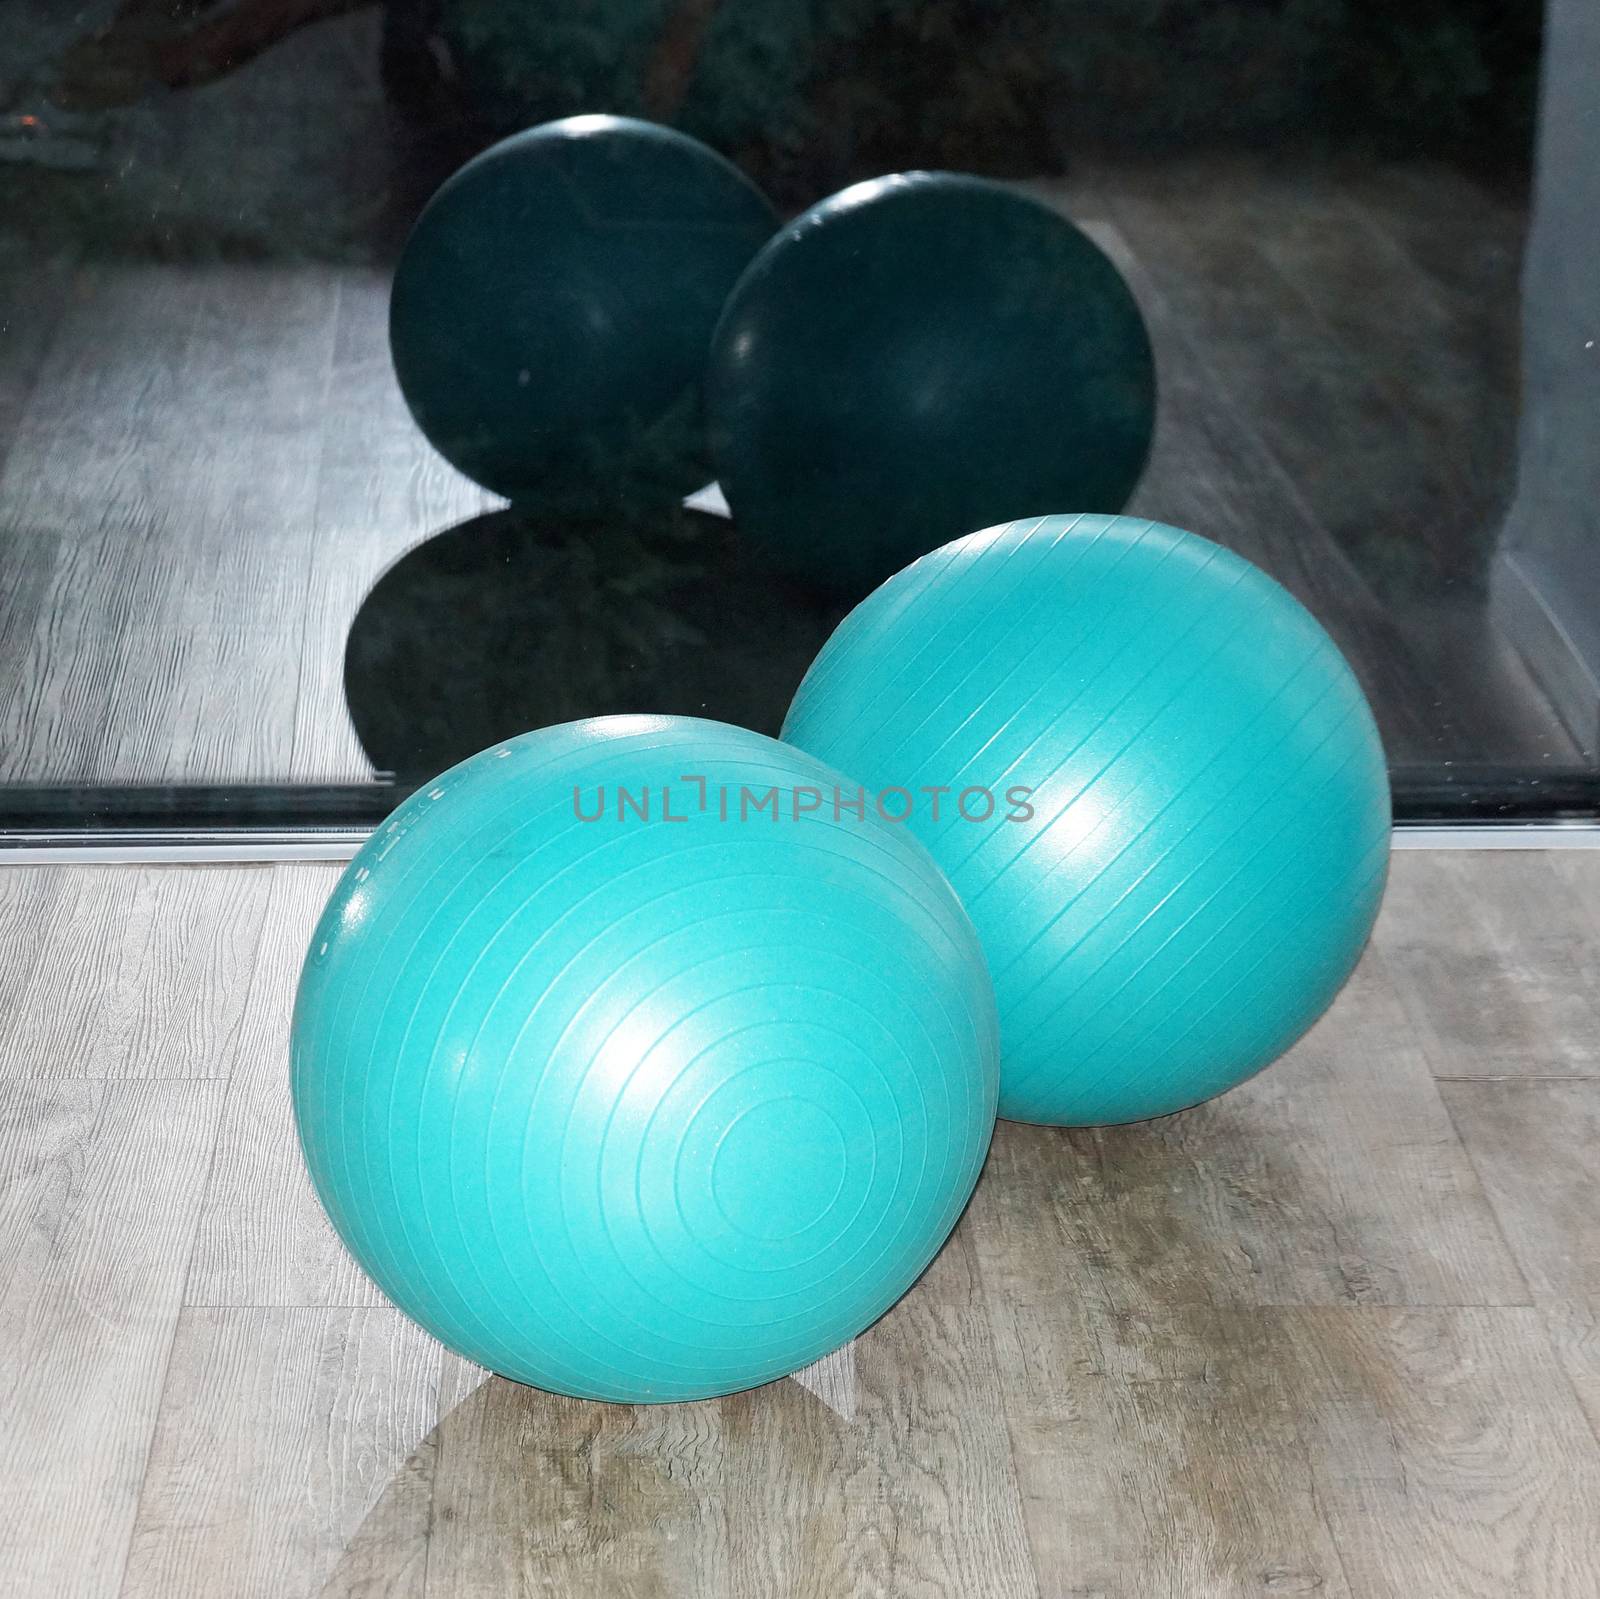 fitness balls by the window in the gym close-up by Annado